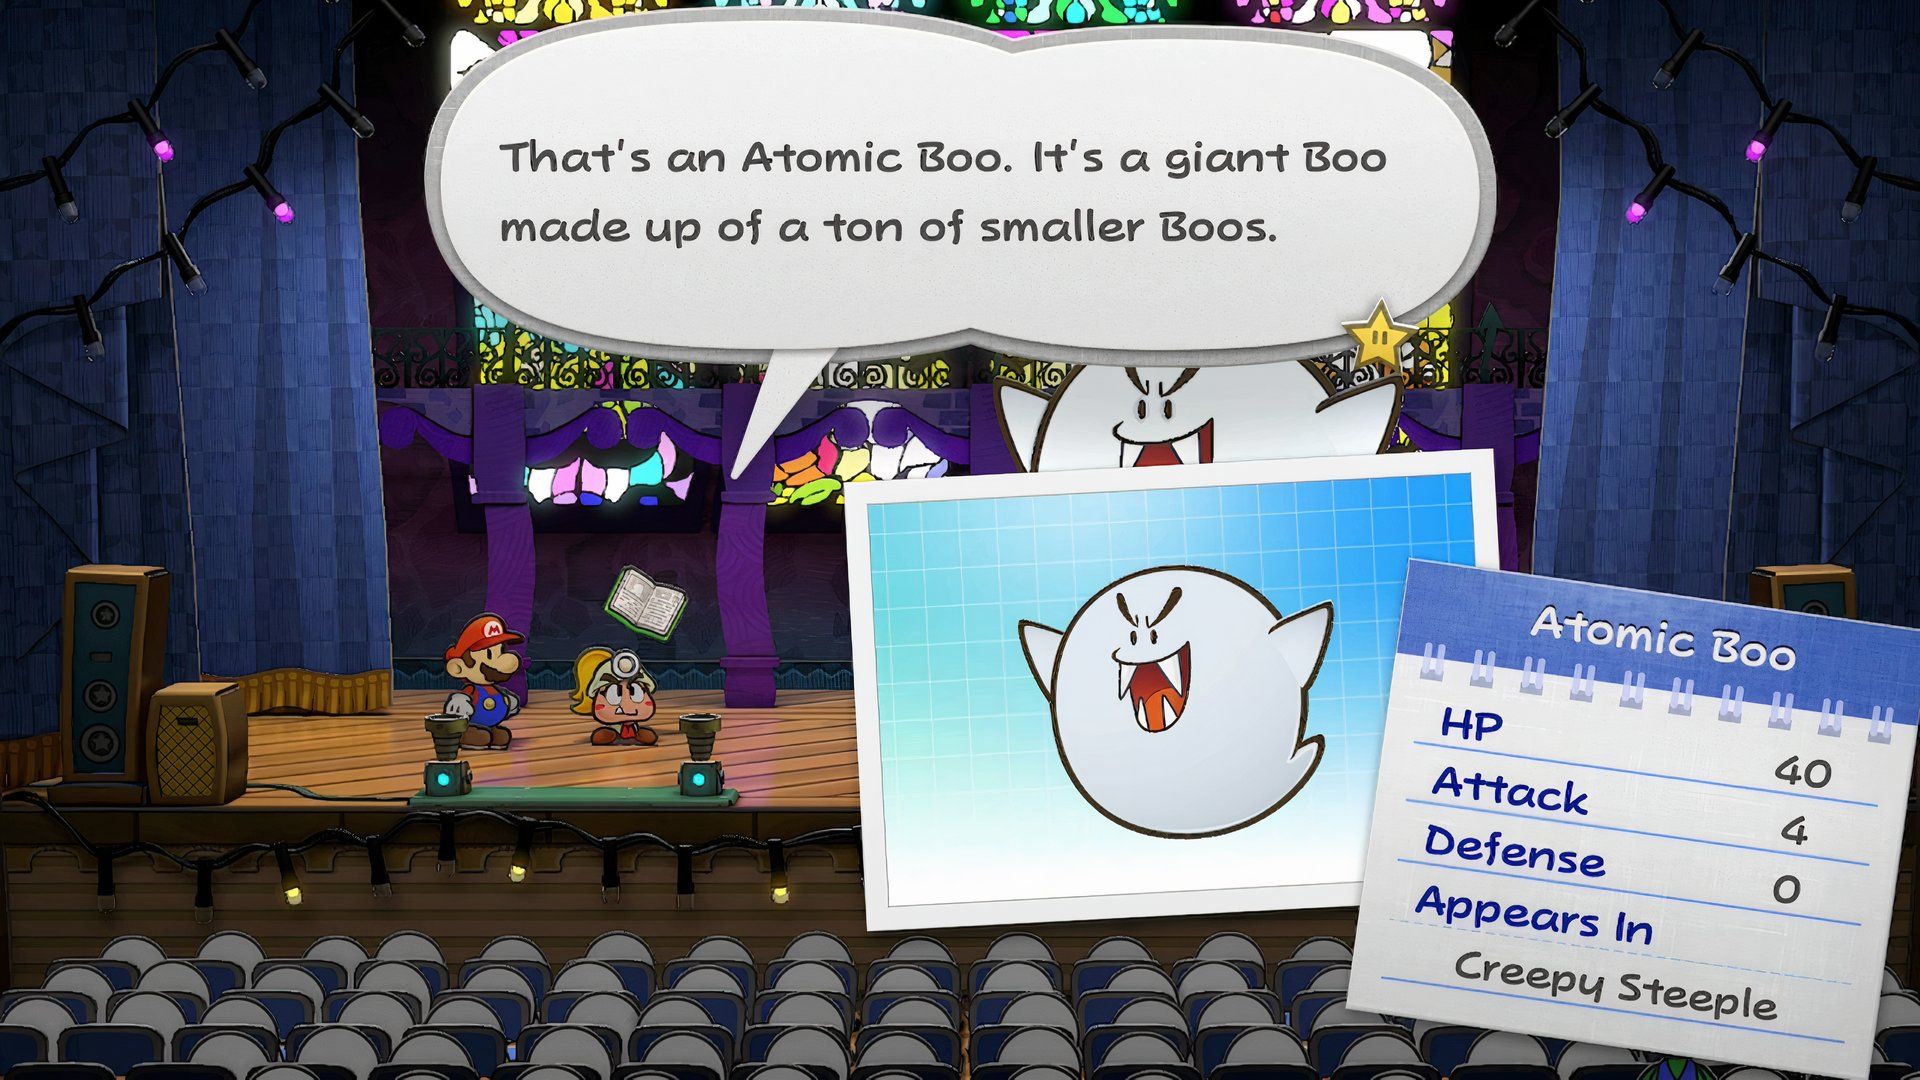 Paper Mario: The Thousand-Year Door - Atomic Boo in Creepy Steeple